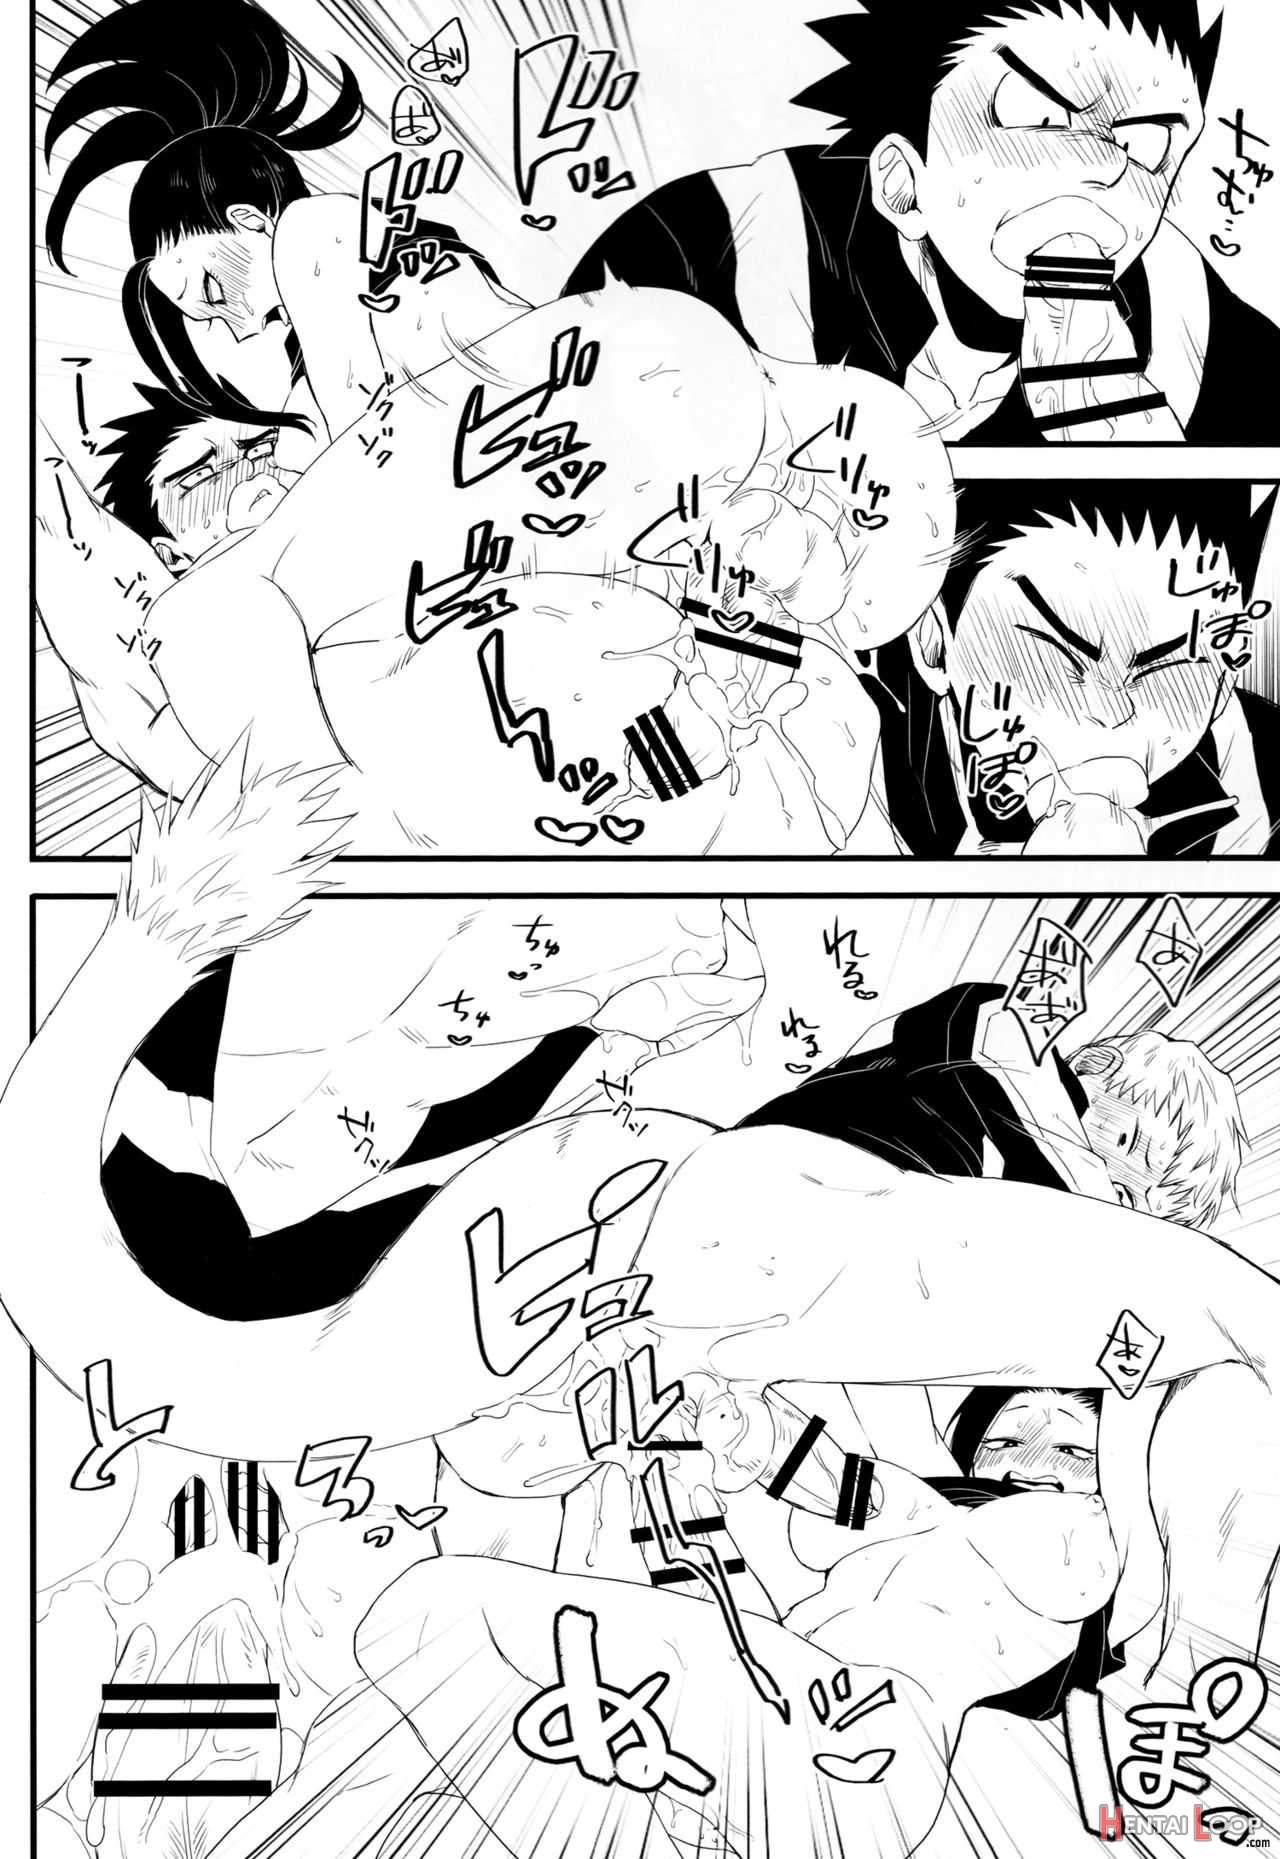 Momo's Dick Rampage page 9